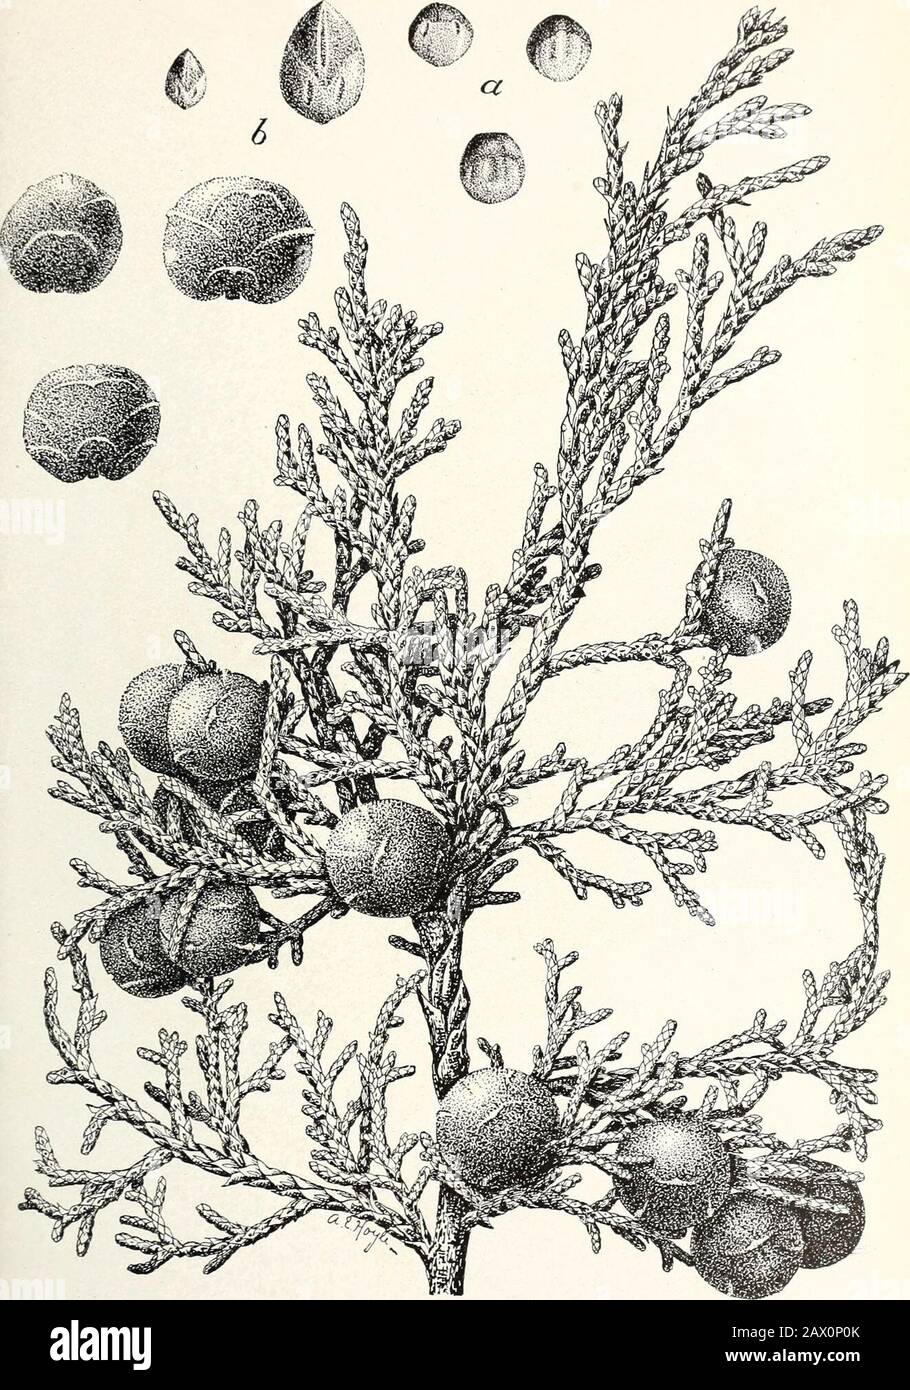 The cypress and juniper trees of the Rocky Mountain region . JUN.PERUS UTAHENSIS: BRANCH FROM YOUNG TREE Show.NG LARGER Form of Leaves. or Juvenile Bui. 207, U. S. Dept. of Agriculture. Plate XVI. Juniperus megalocarpa: Foliage and Ripe Fruit. a, Showing flat side of seeds (natural size); b, showing opposite (narrow) side of seed (natural size and enlarged twice natural size). Bui. 207, U. S. Dept. of Agriculture Stock Photo